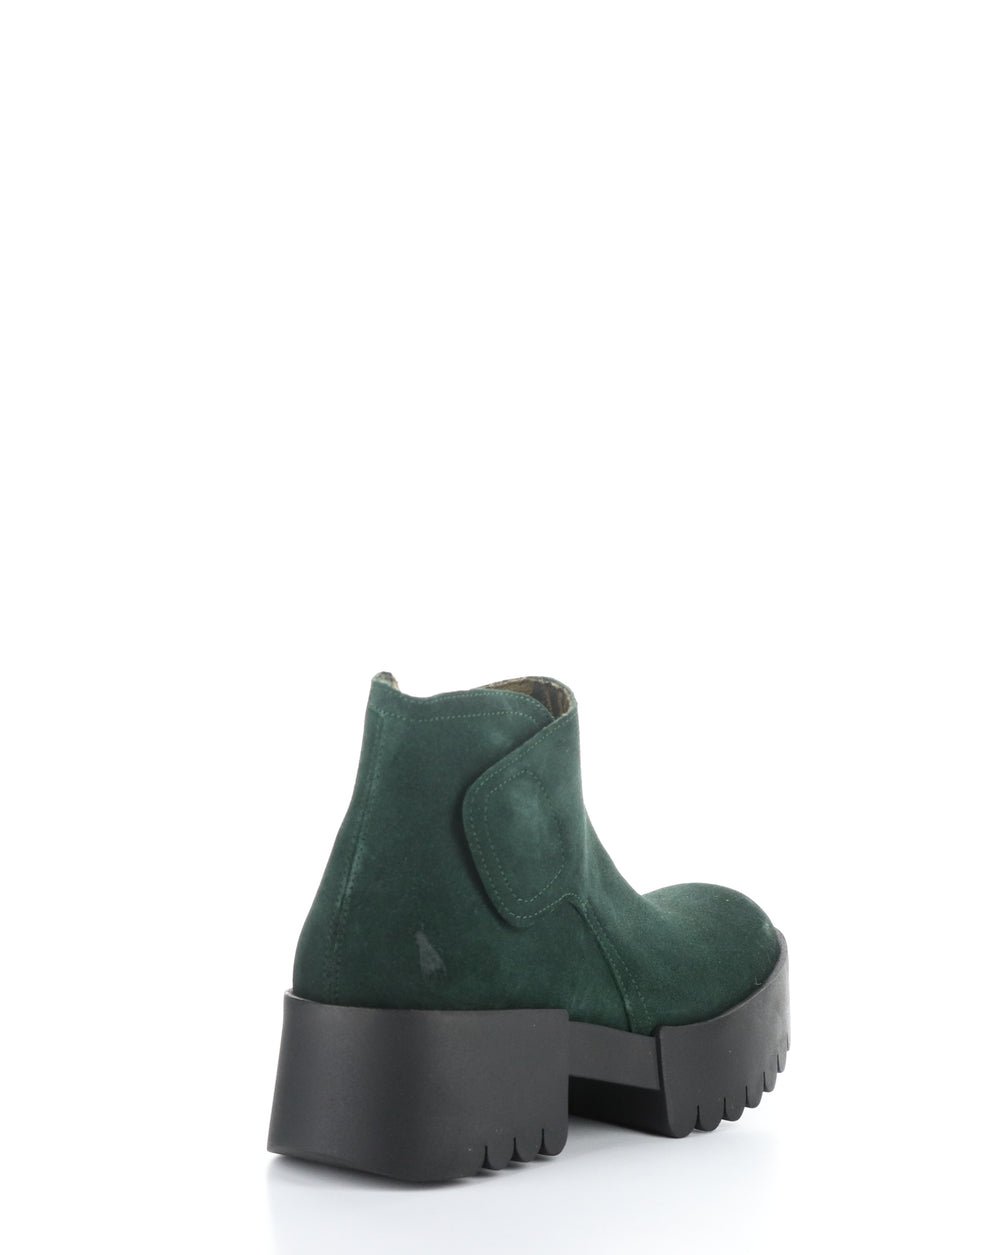 ENDO006FLY 002 GREEN FOREST Velcro Boots